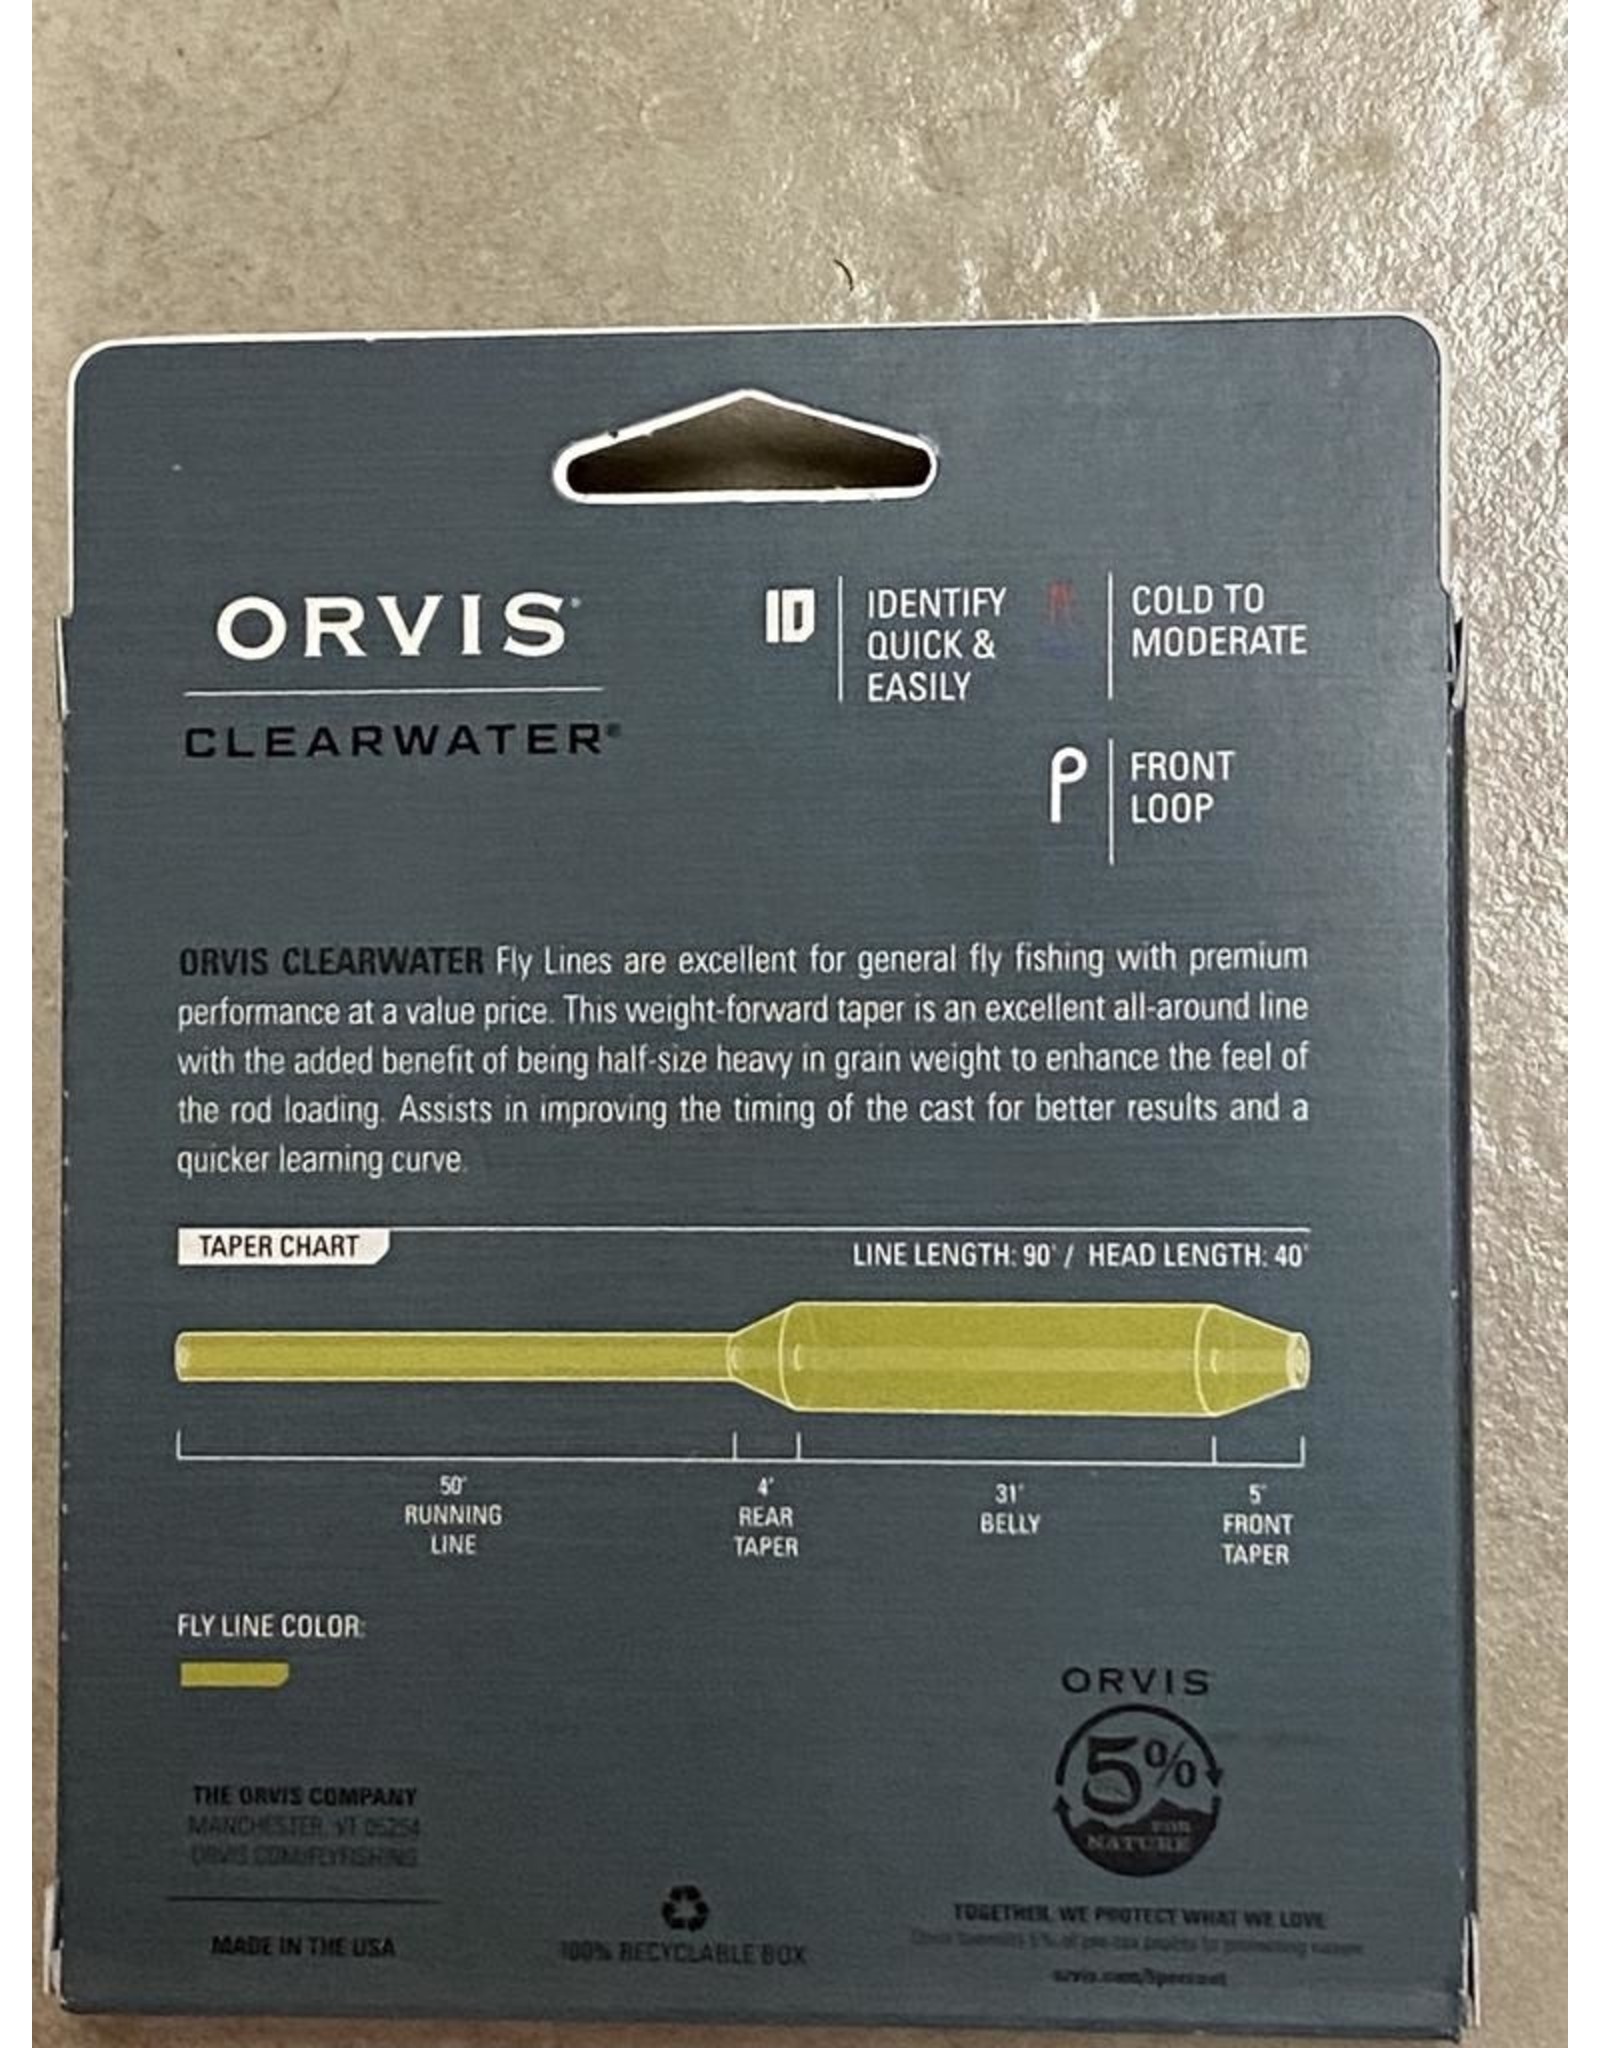 Orvis NEW ORVIS Clearwater Trout Fly Line - Royal Gorge Anglers